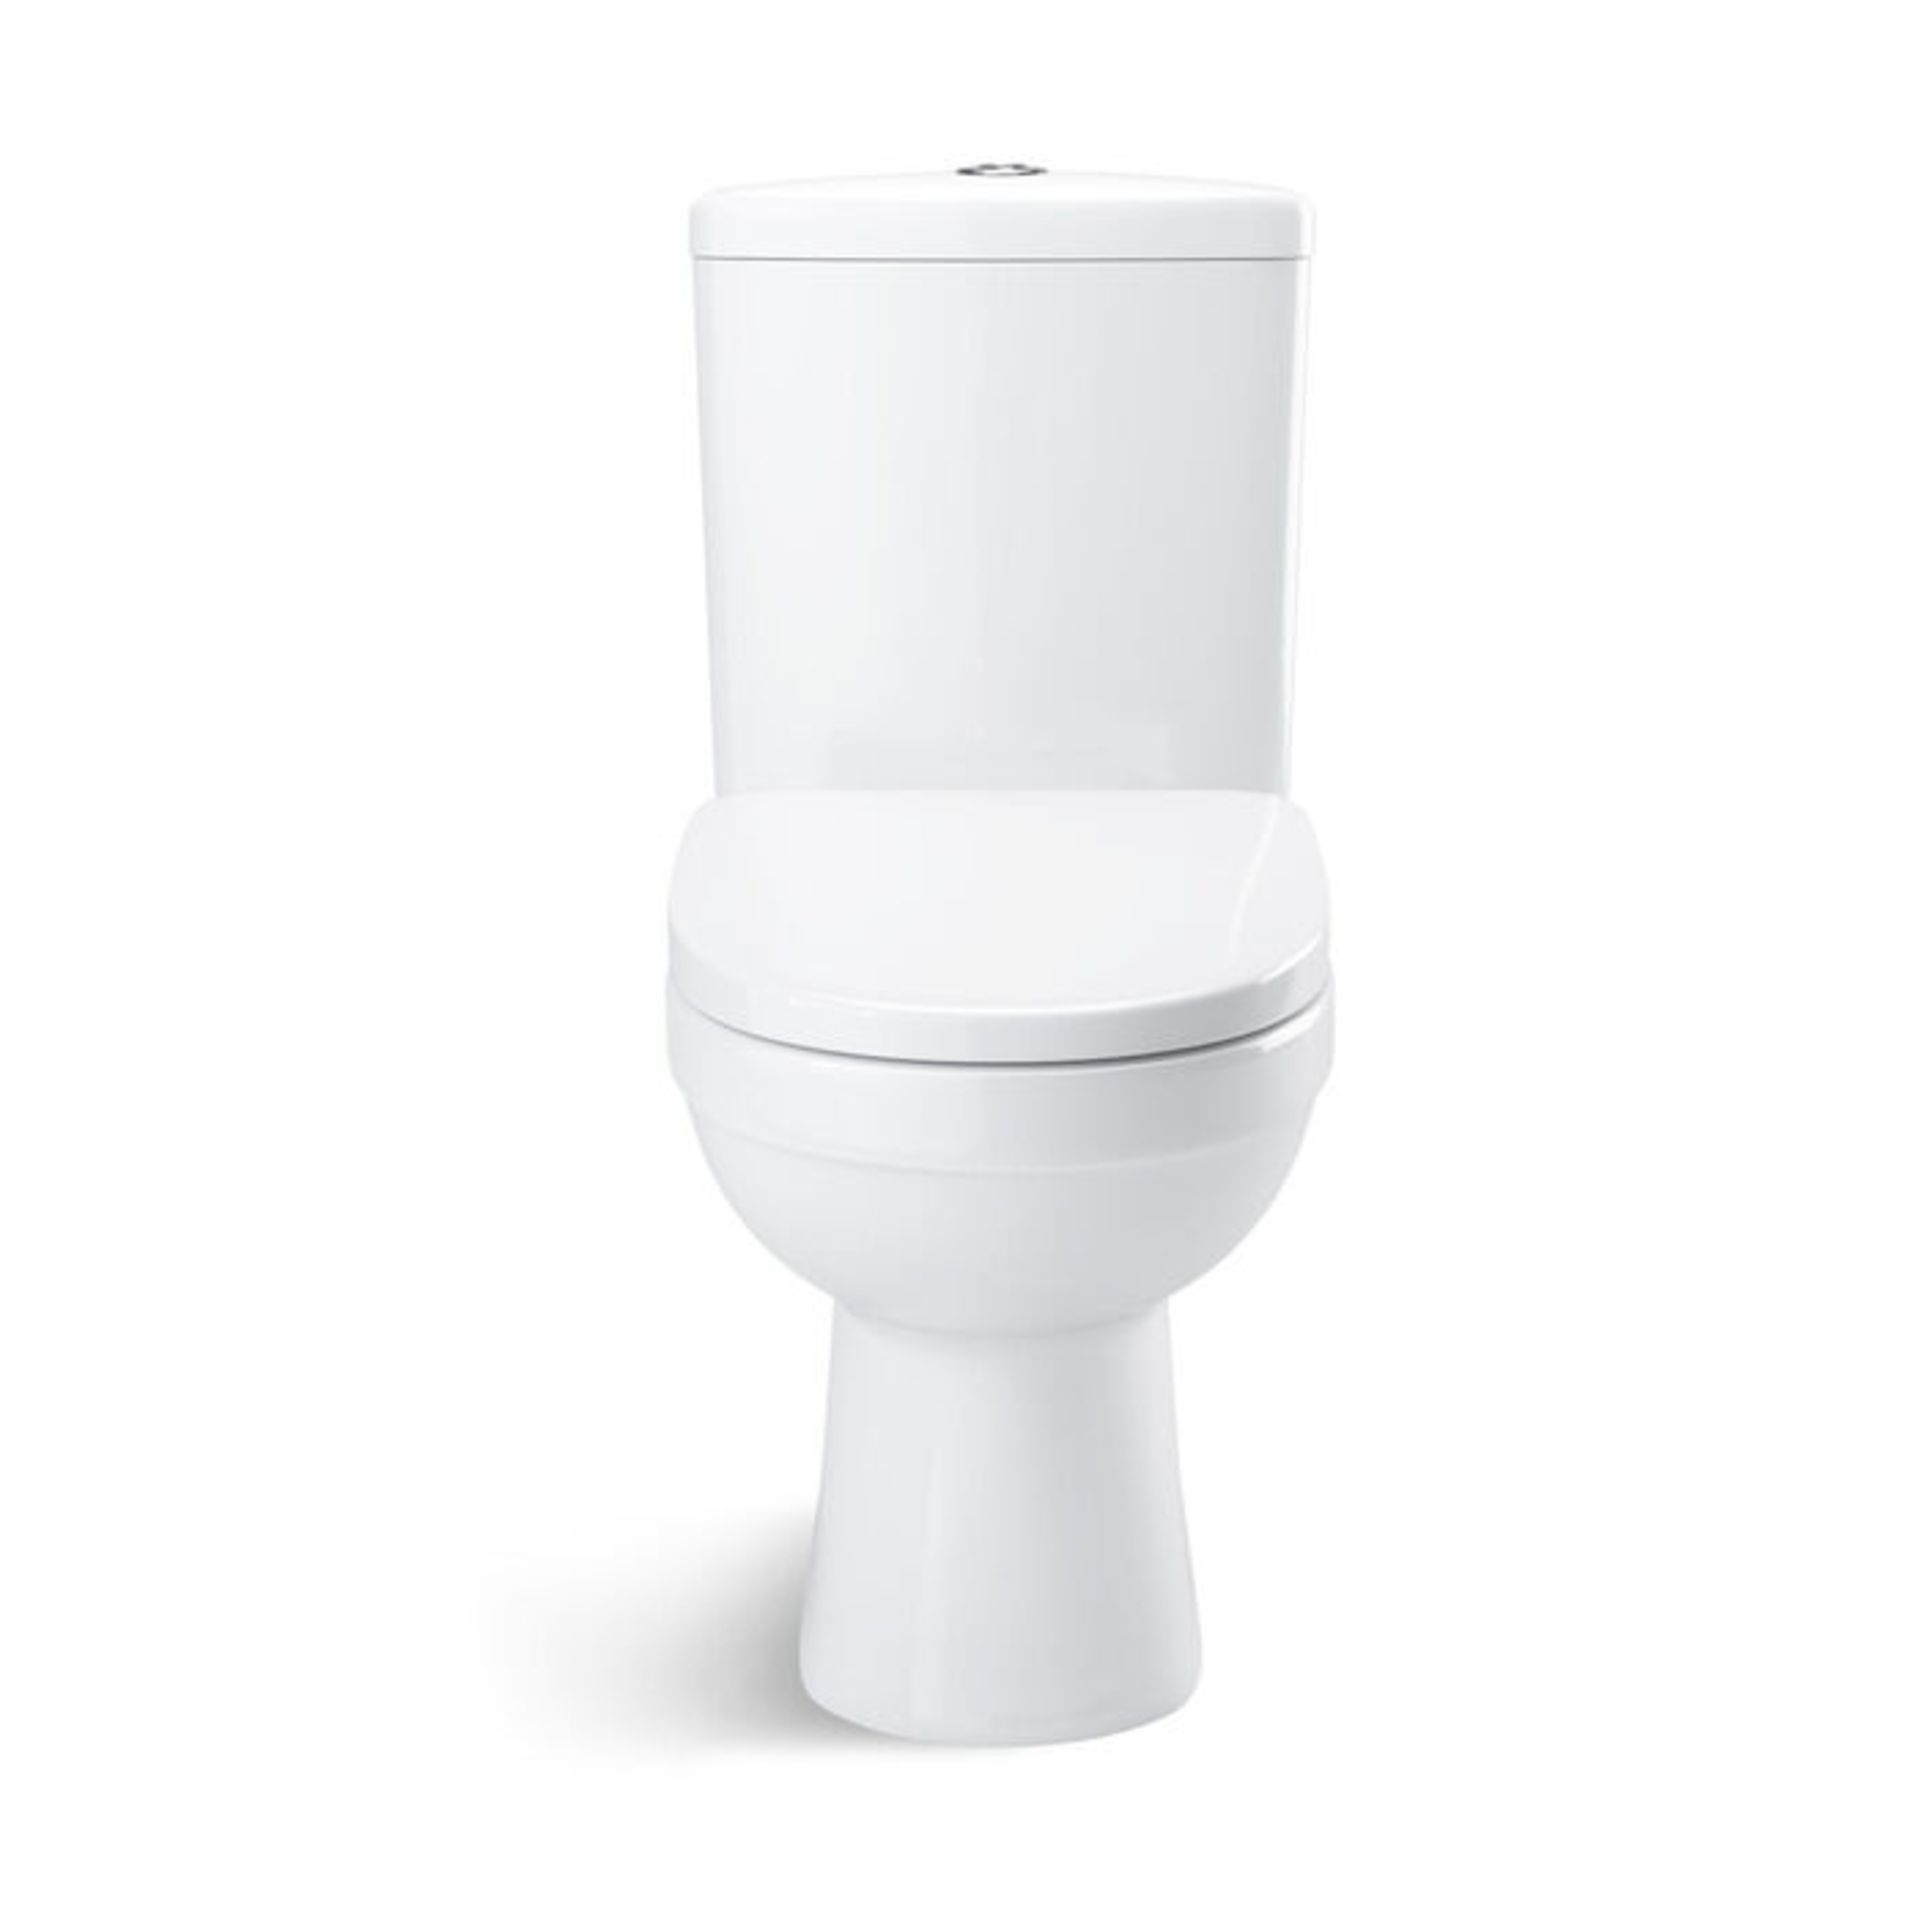 (DW31) Sabrosa II Close Coupled Toilet & Cistern inc Soft Close Seat. Made from White Vitreous ... - Image 3 of 4